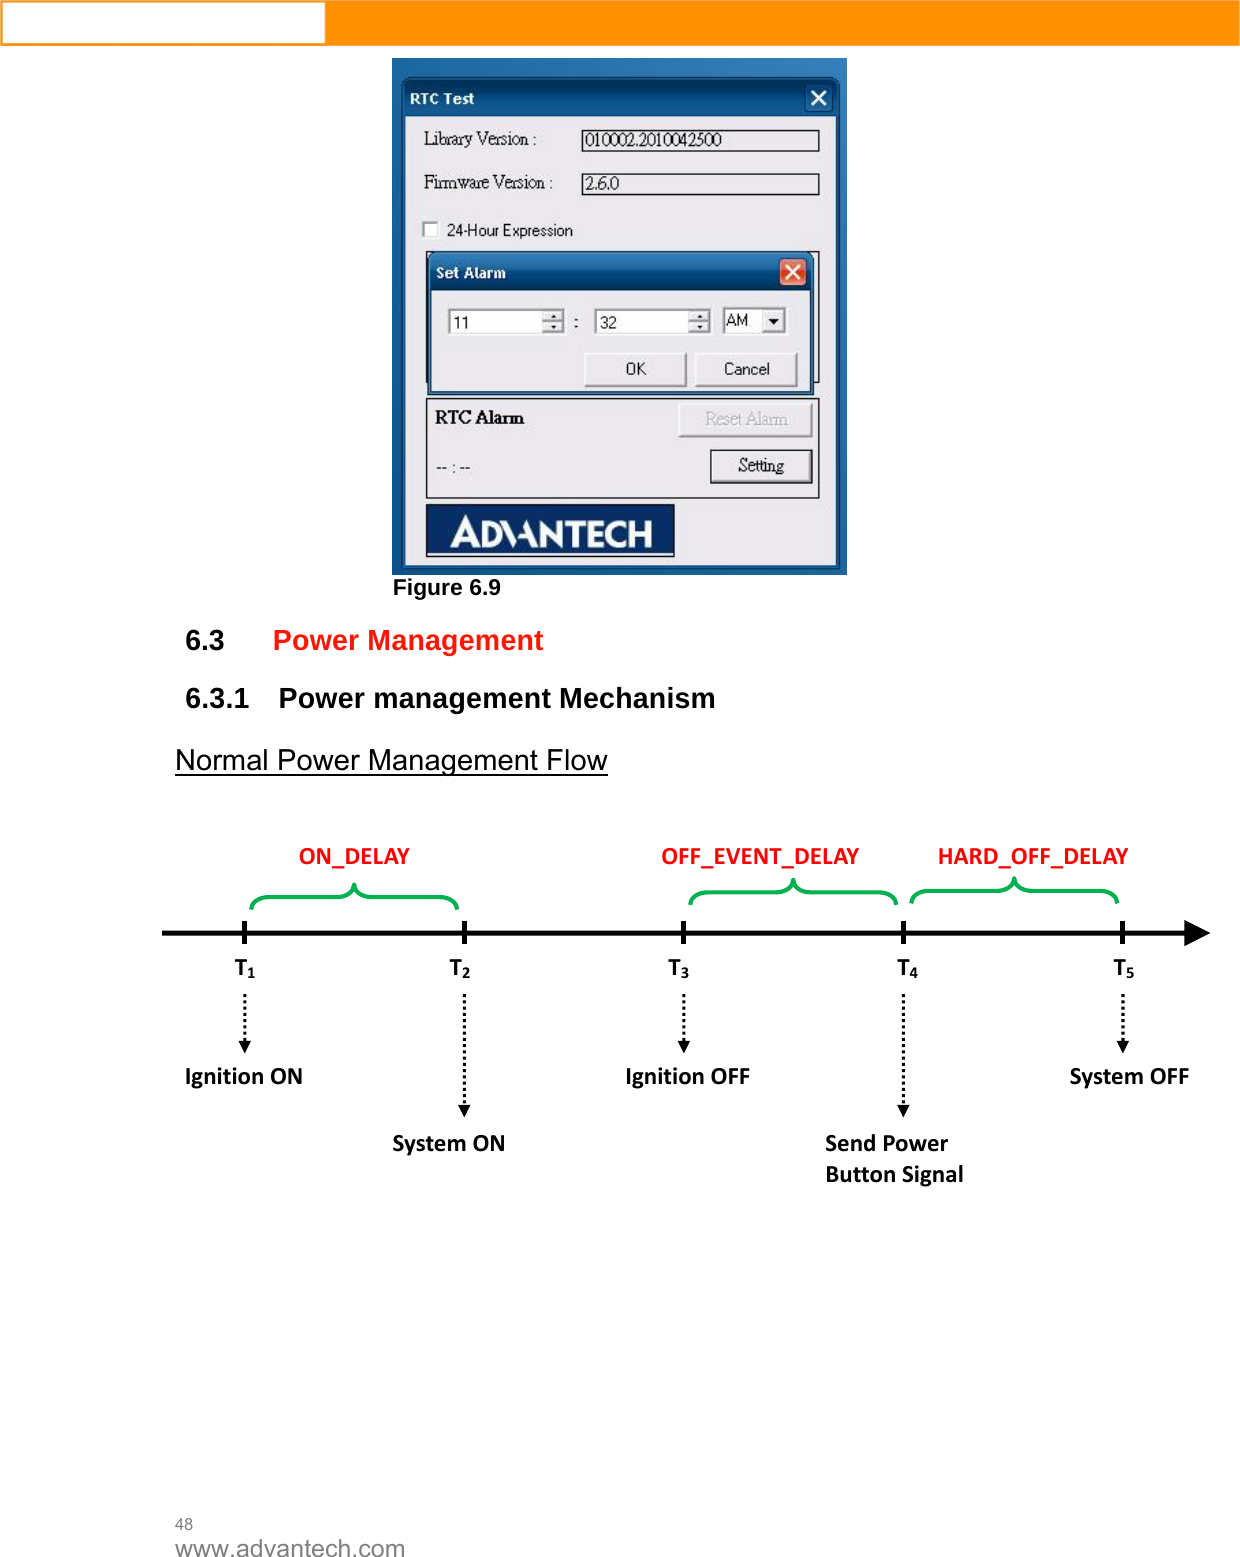  48 www.advantech.com  Figure 6.9  6.3Power Management    6.3.1  Power management Mechanism Normal Power Management Flow             T1T2T3T4T5IgnitionONSystemONIgnitionOFFSendPowerButtonSignalSystemOFFON_DELAYOFF_EVENT_DELAY HARD_OFF_DELAY